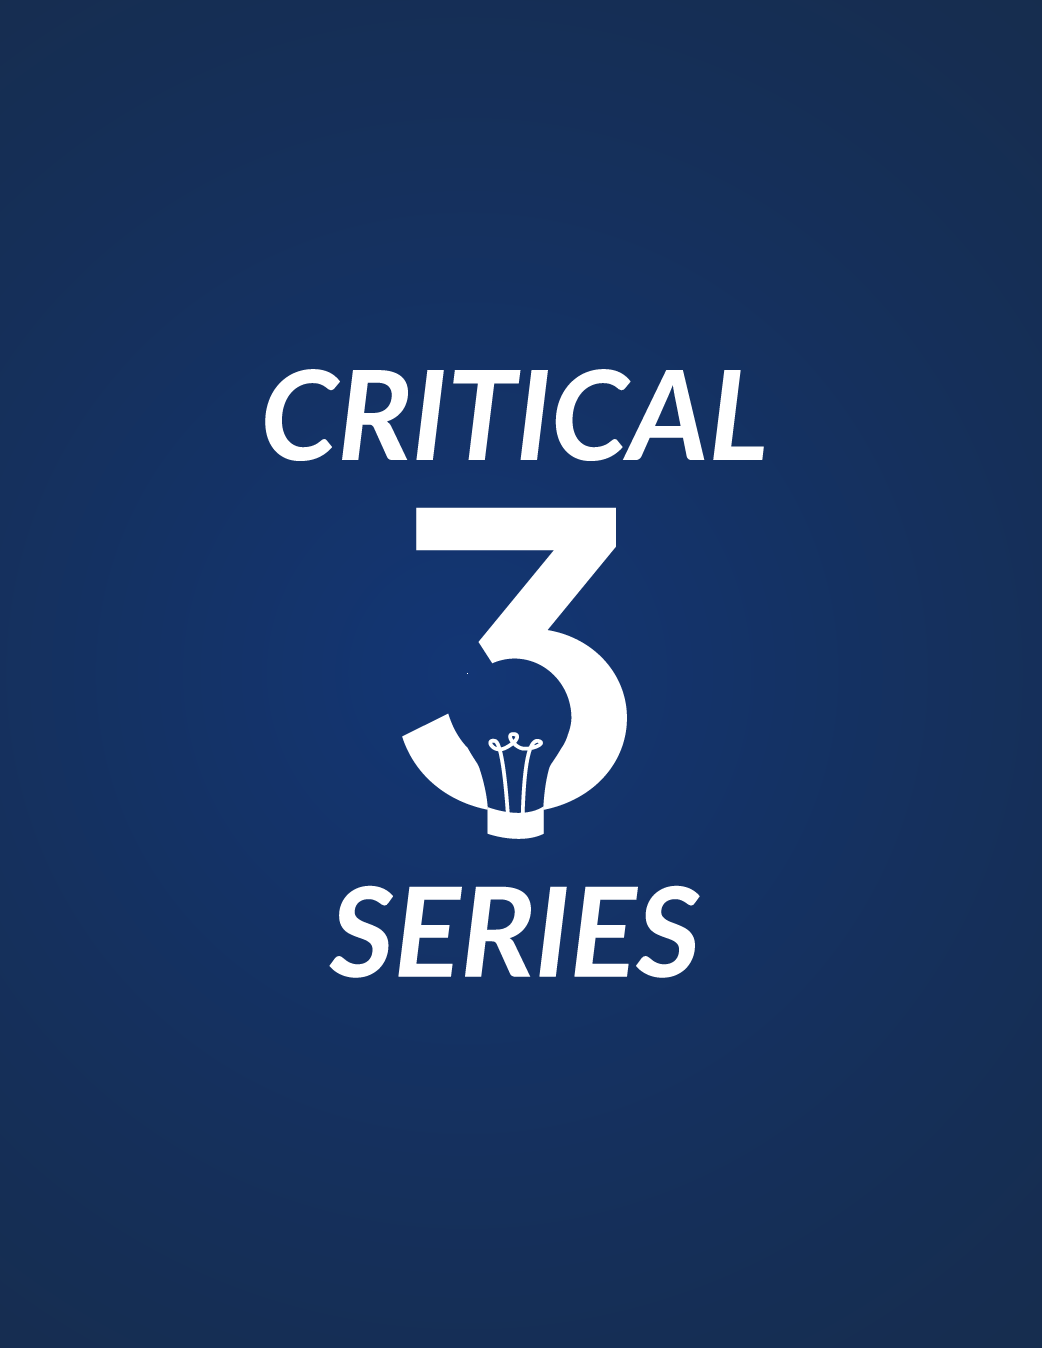 Critical 3: Current Drug Trends in Your Community